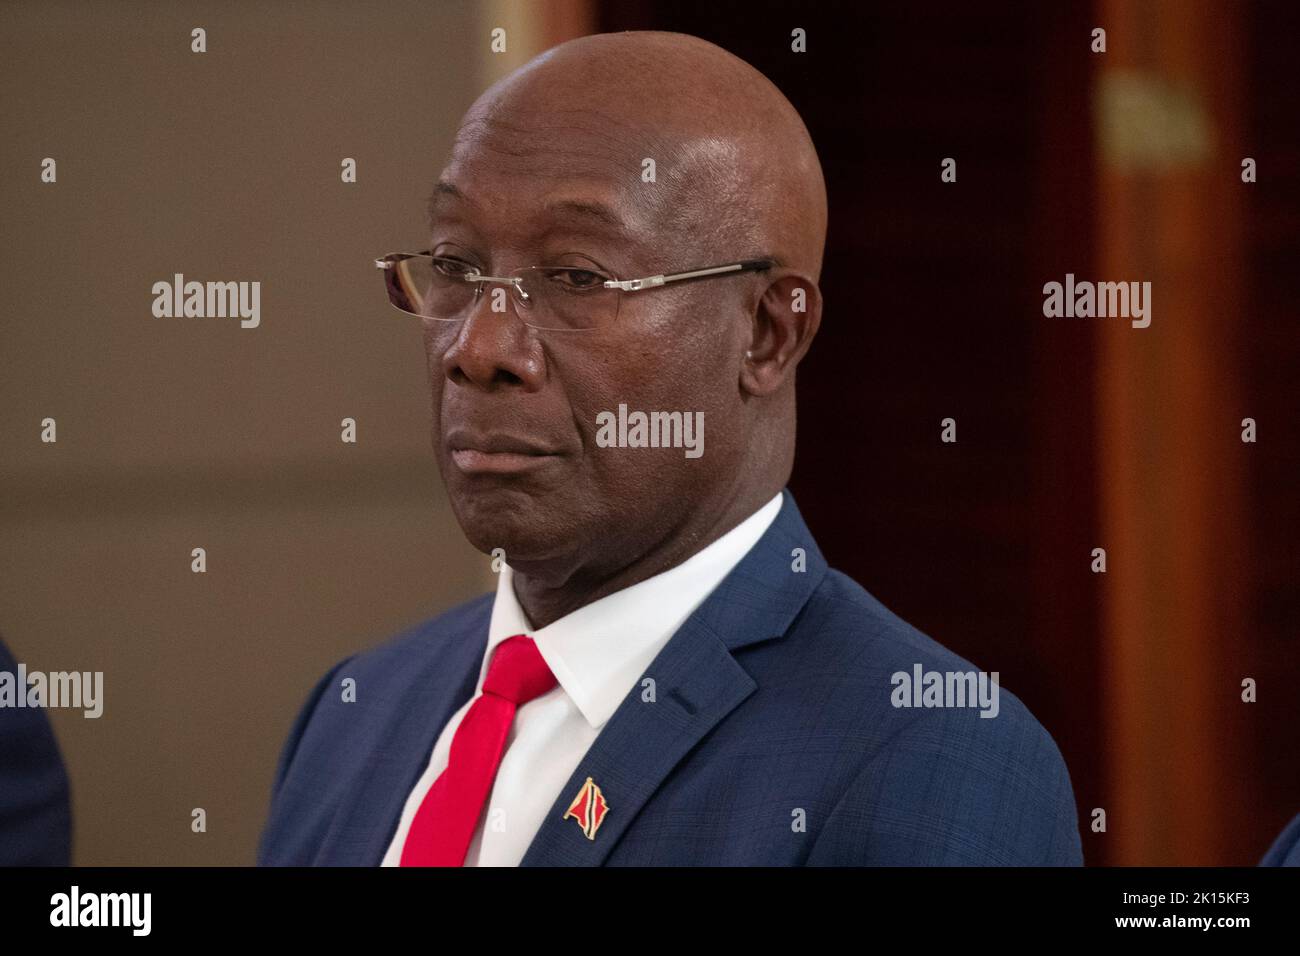 Prime Minister of Trinidad and Tobago Keith Rowley participates in a multilateral meeting with the US Vice President Kamala Harris, Caribbean and Dominican leaders, in the Blair House across the street from the White House, in Washington, DC, USA, 15 September 2022. Stock Photo